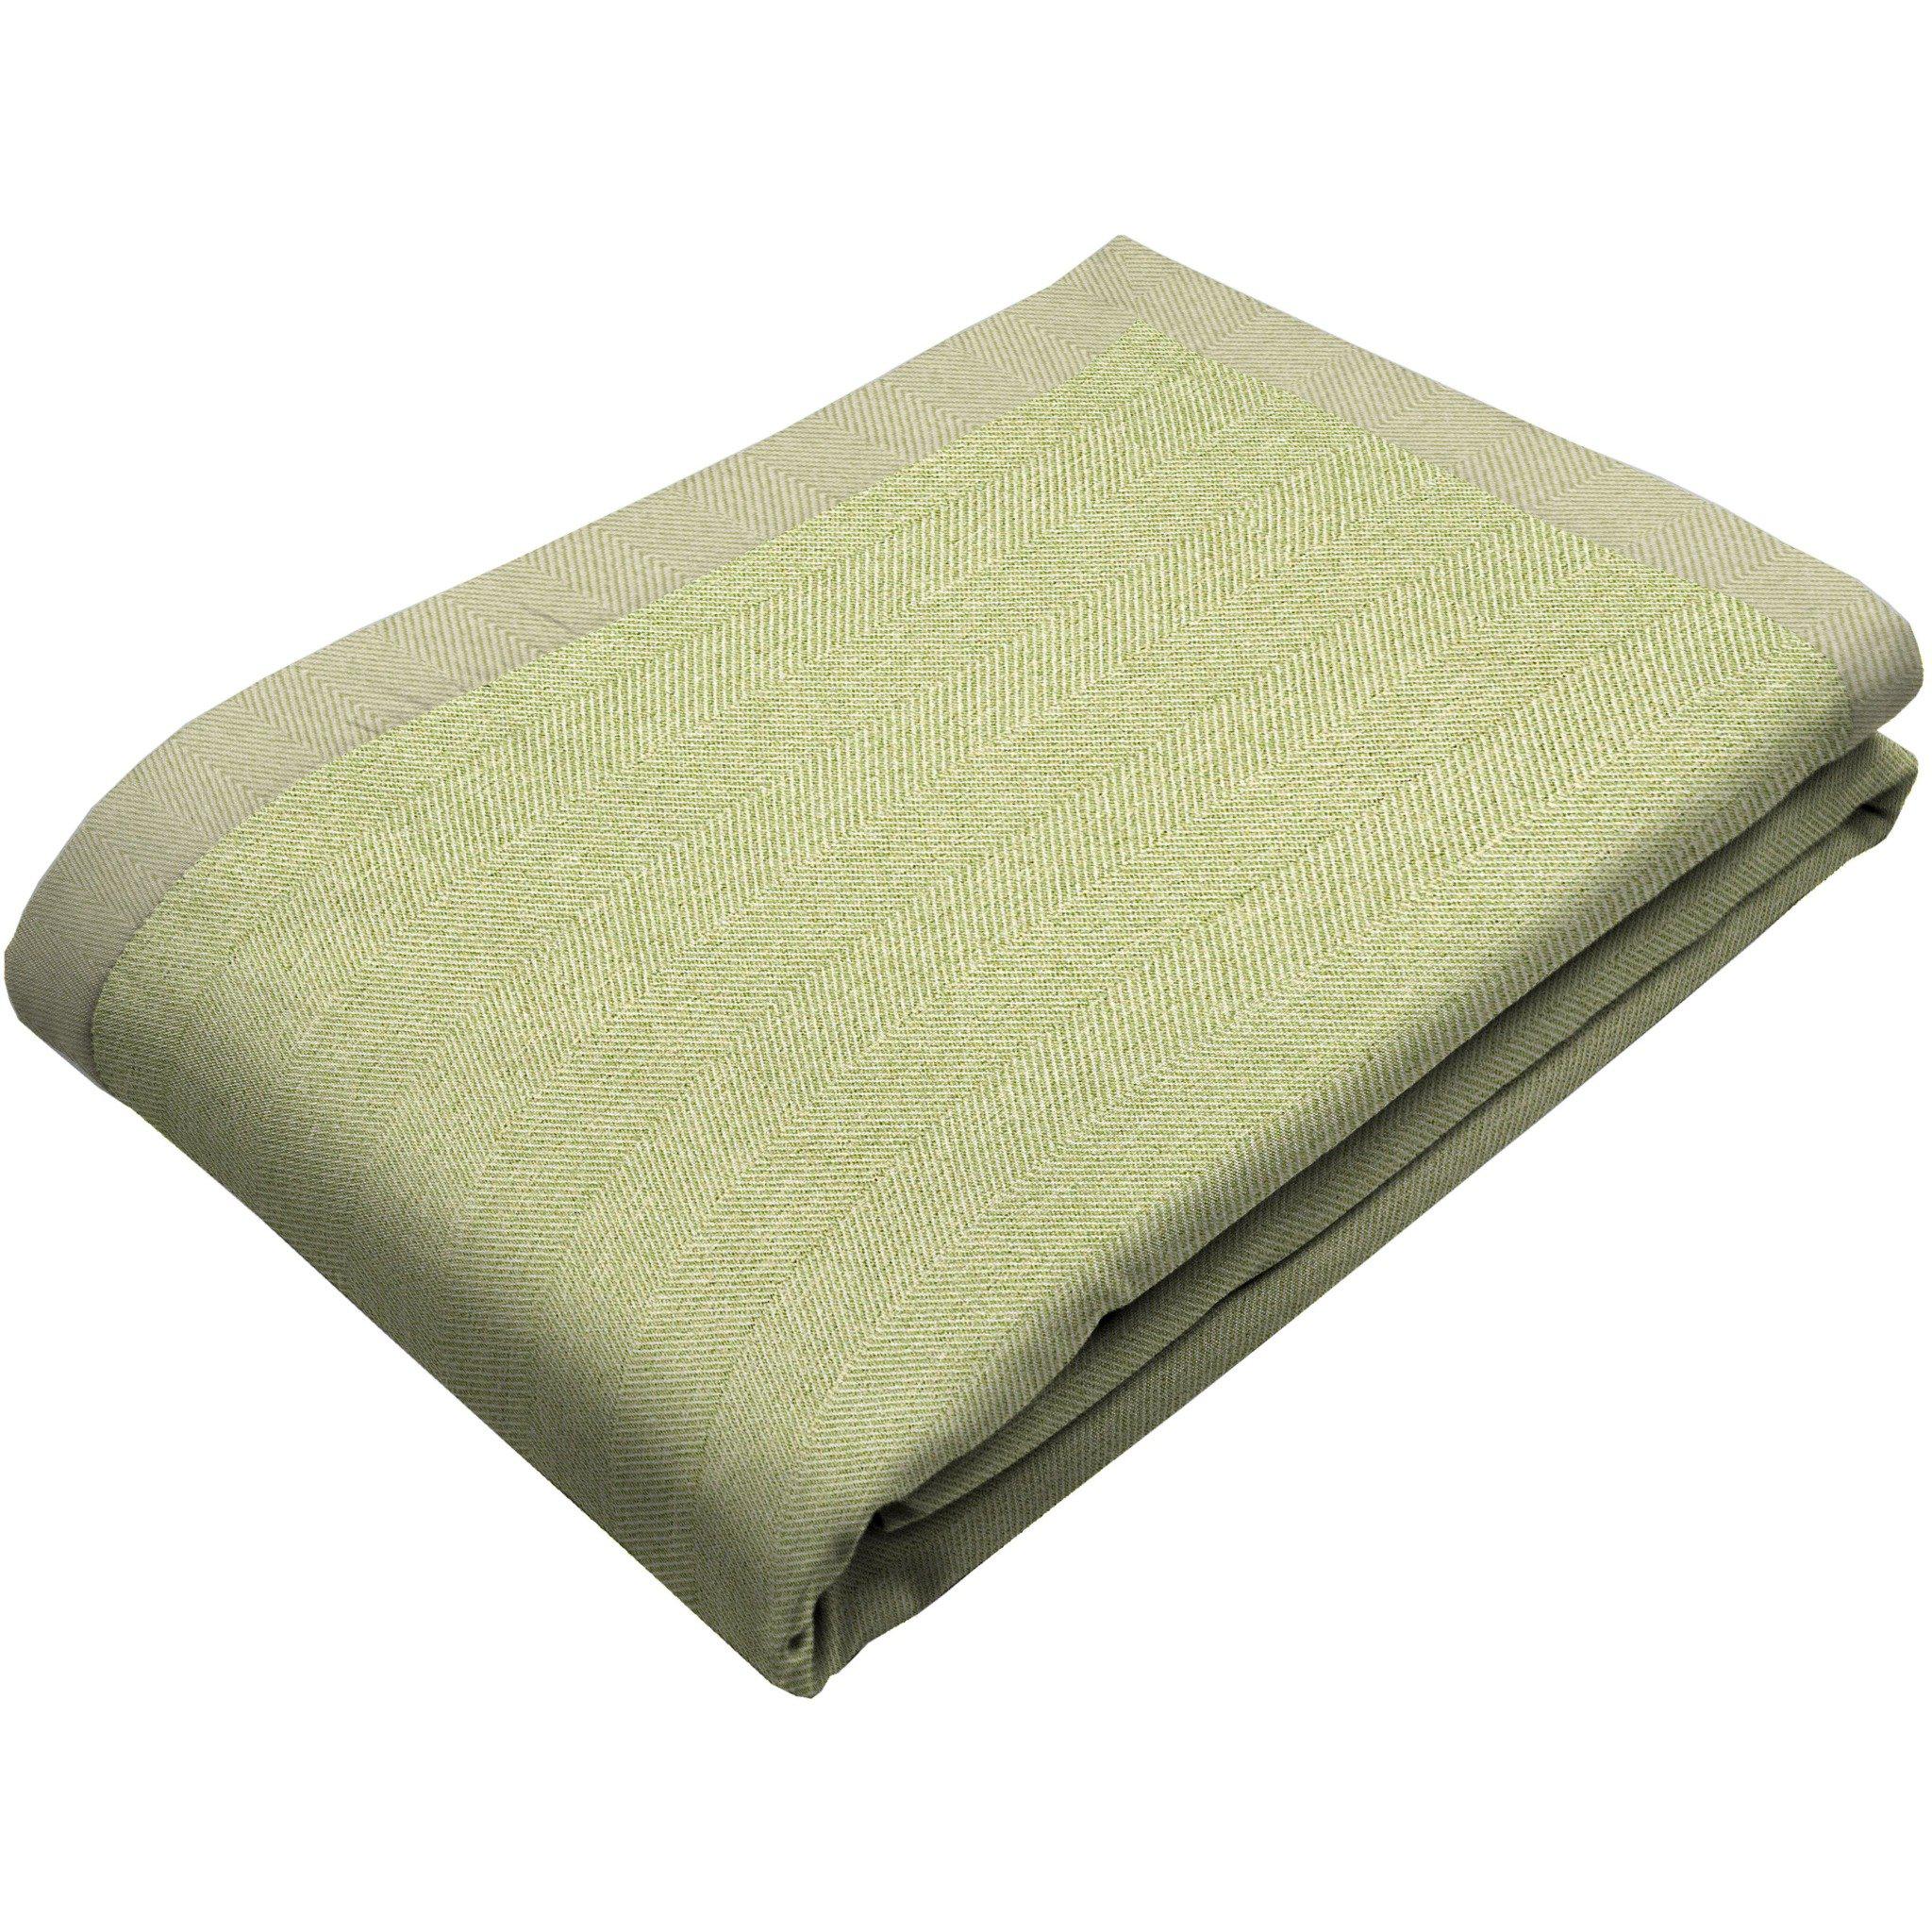 McAlister Textiles Herringbone Sage Green Throws & Runners Throws and Runners Bed Runner (50cm x 240cm) 